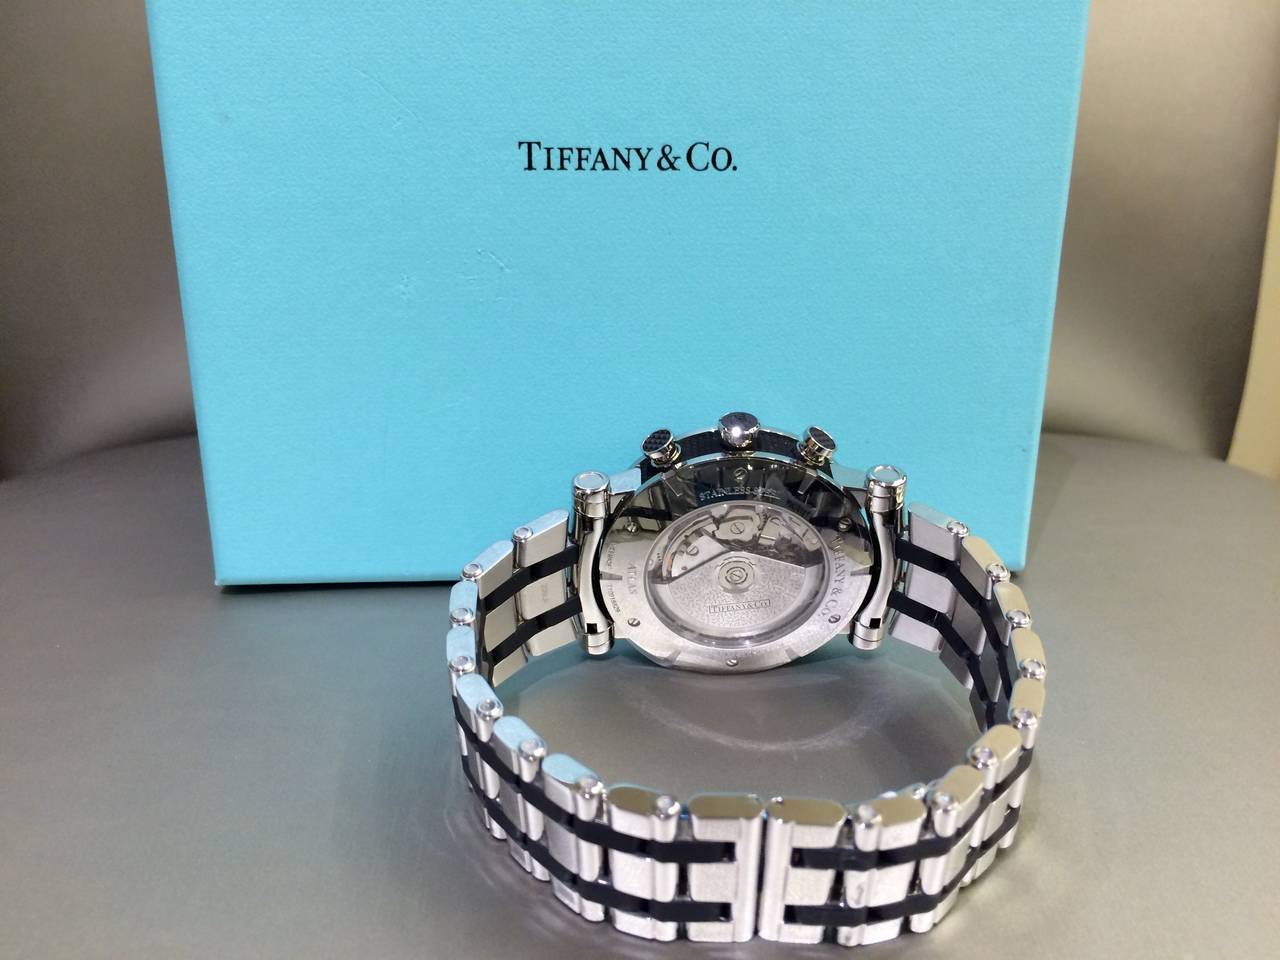 Tiffany & Co. Stainless Steel Rubber Atlas Chronograph Automatic Wristwatch 1